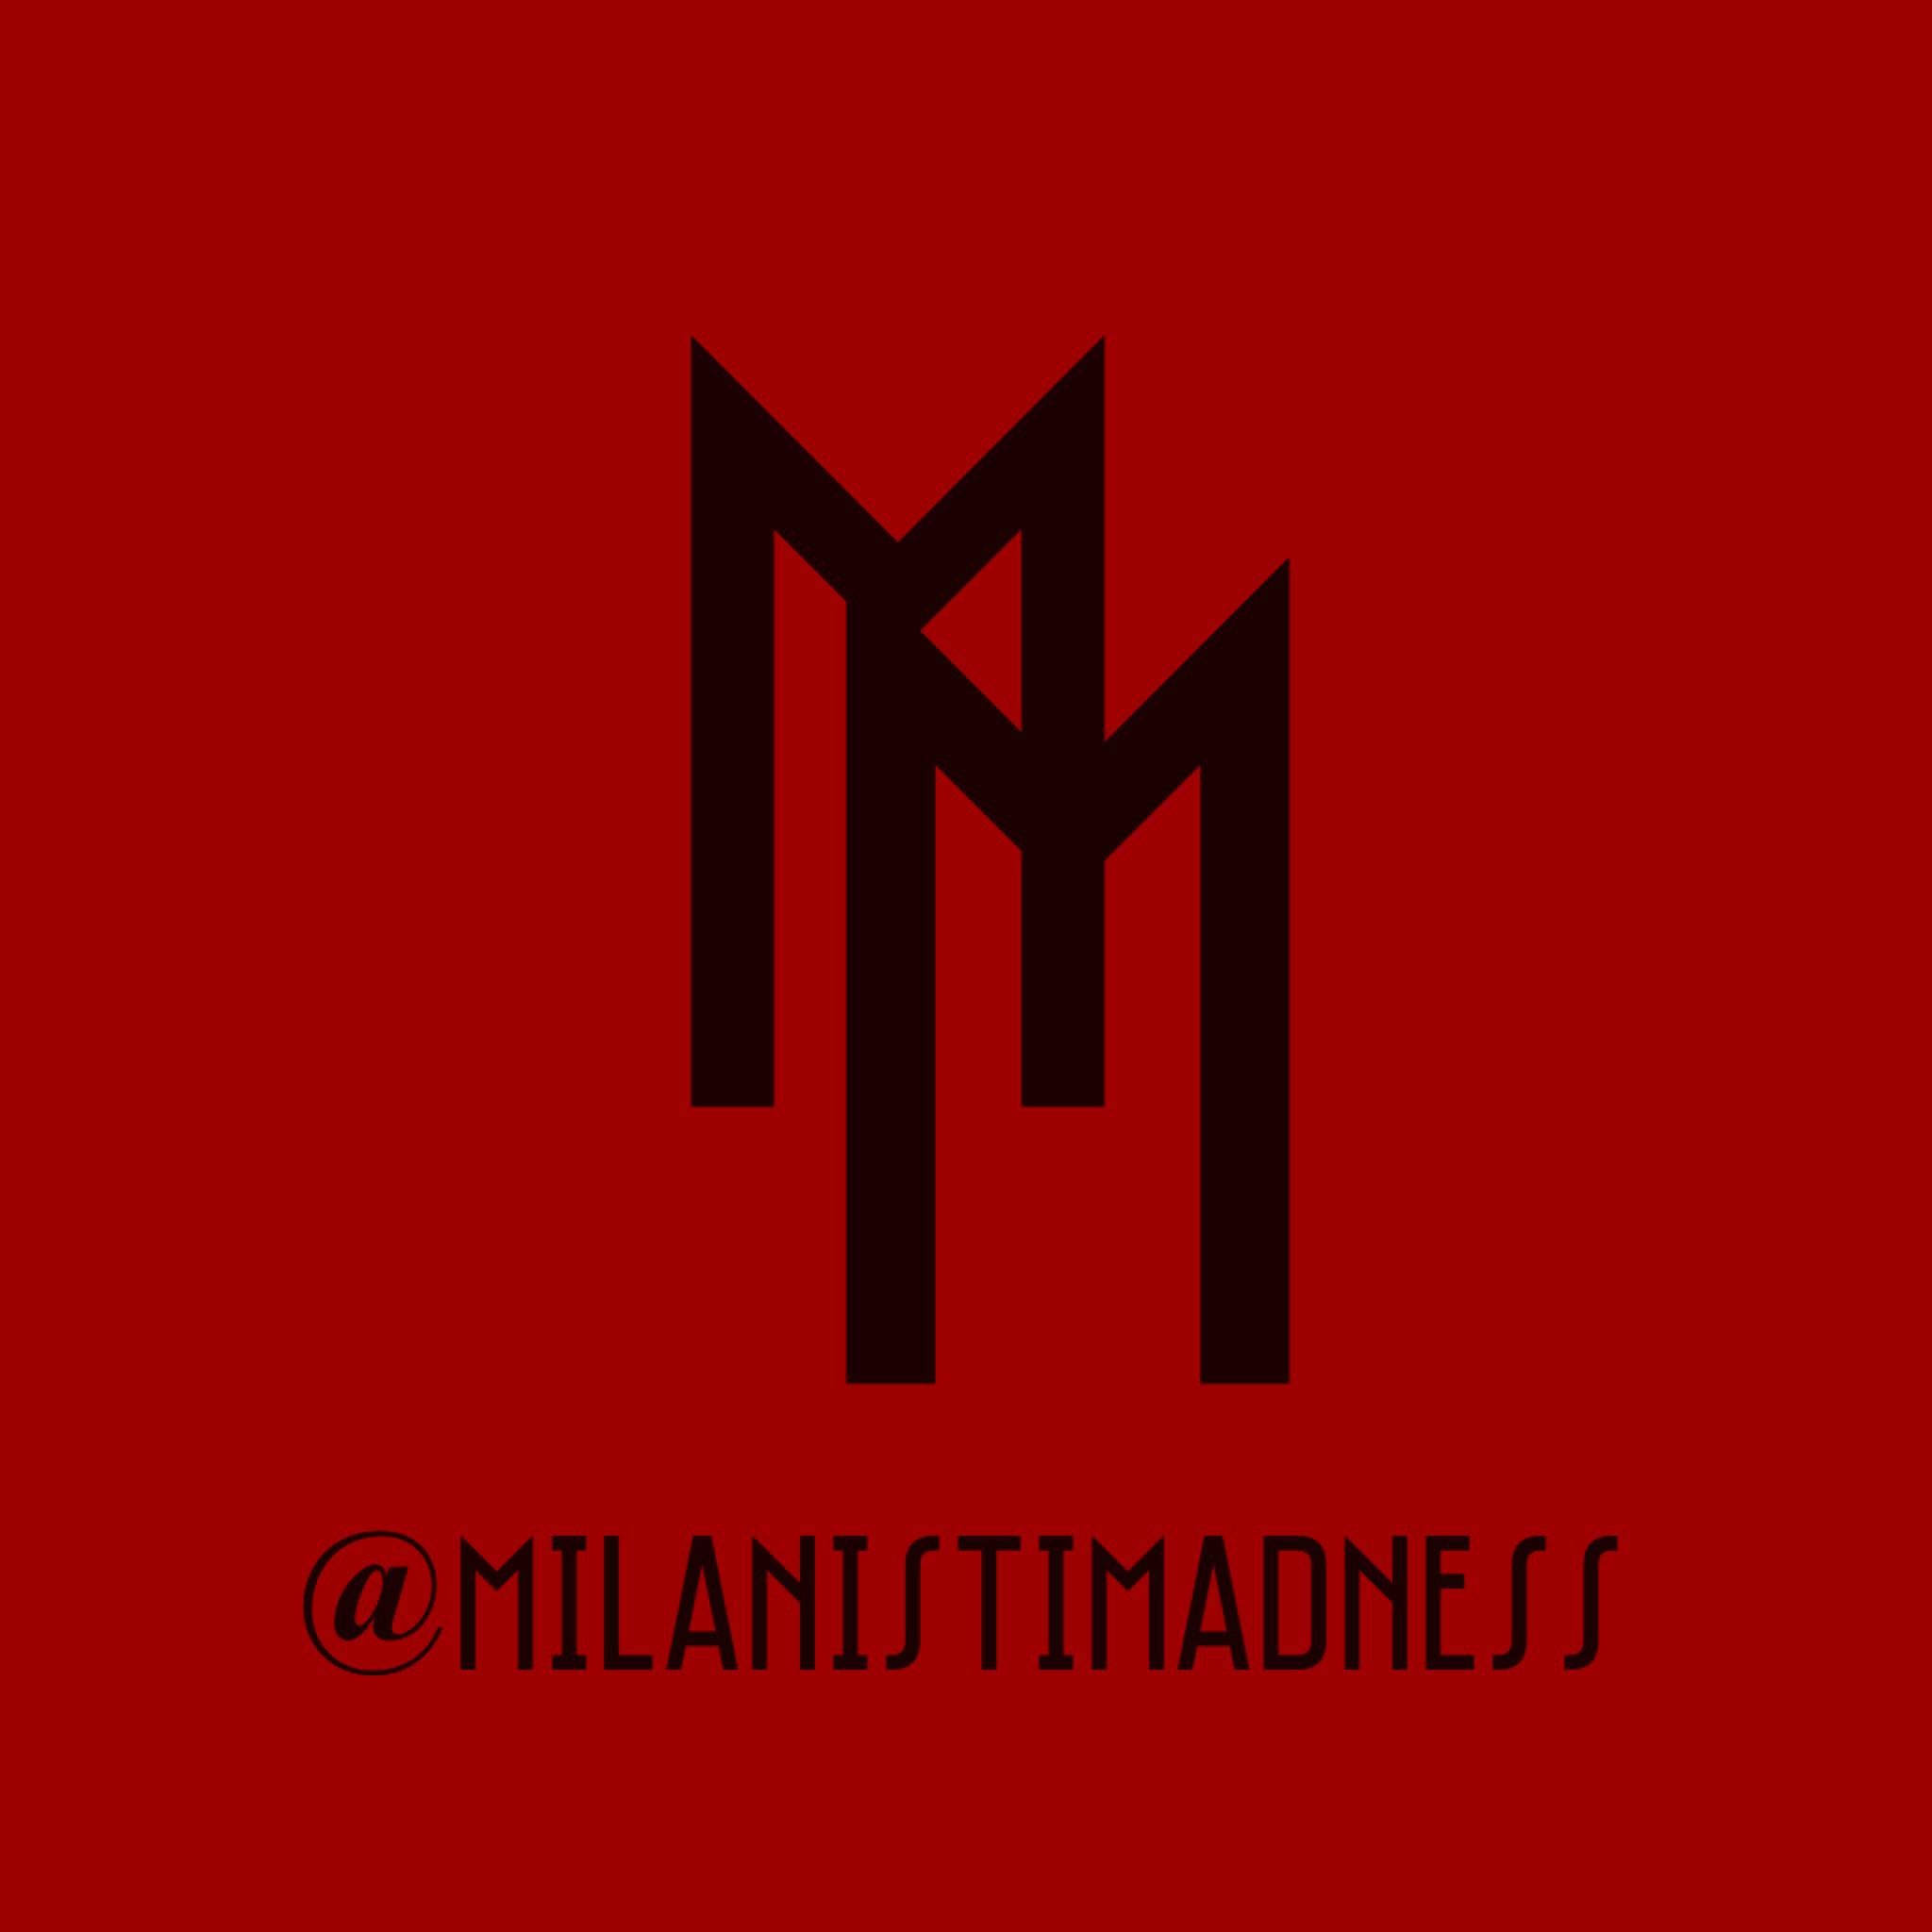 Follow @milanistimadness on IG and @milanistimad on Twitter